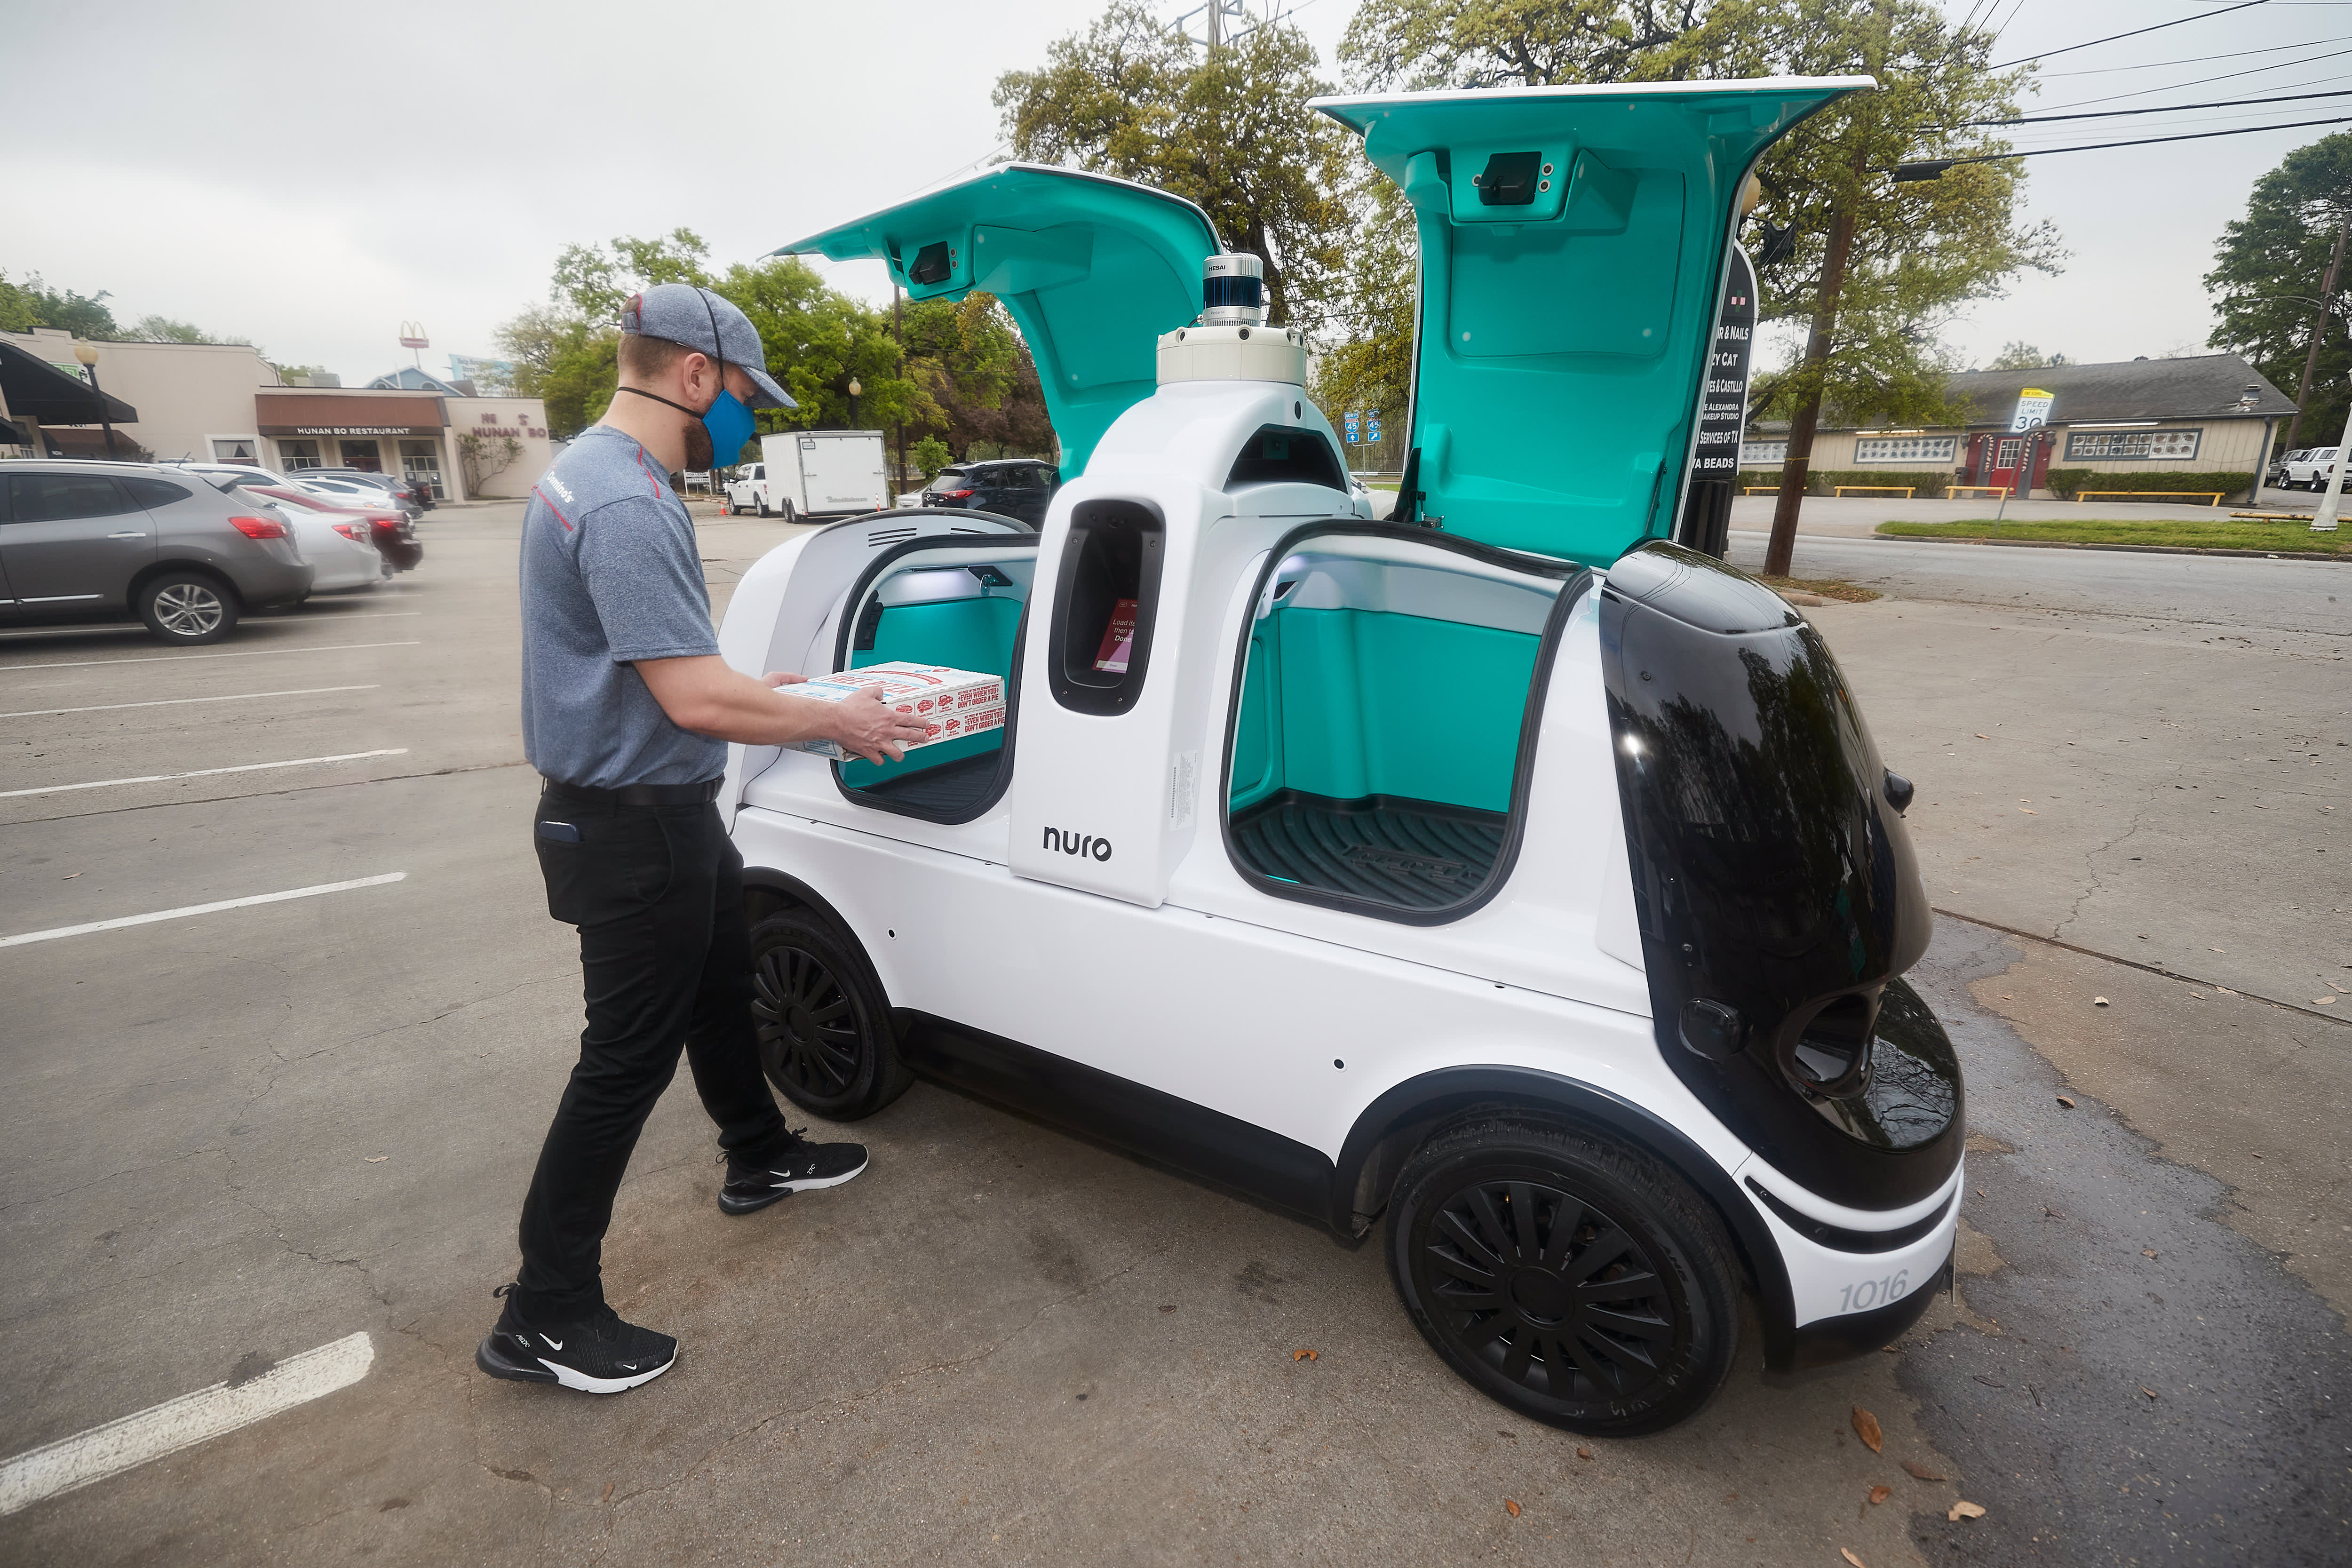 Domino’s Pizza operates driverless delivery with Nuro in Houston